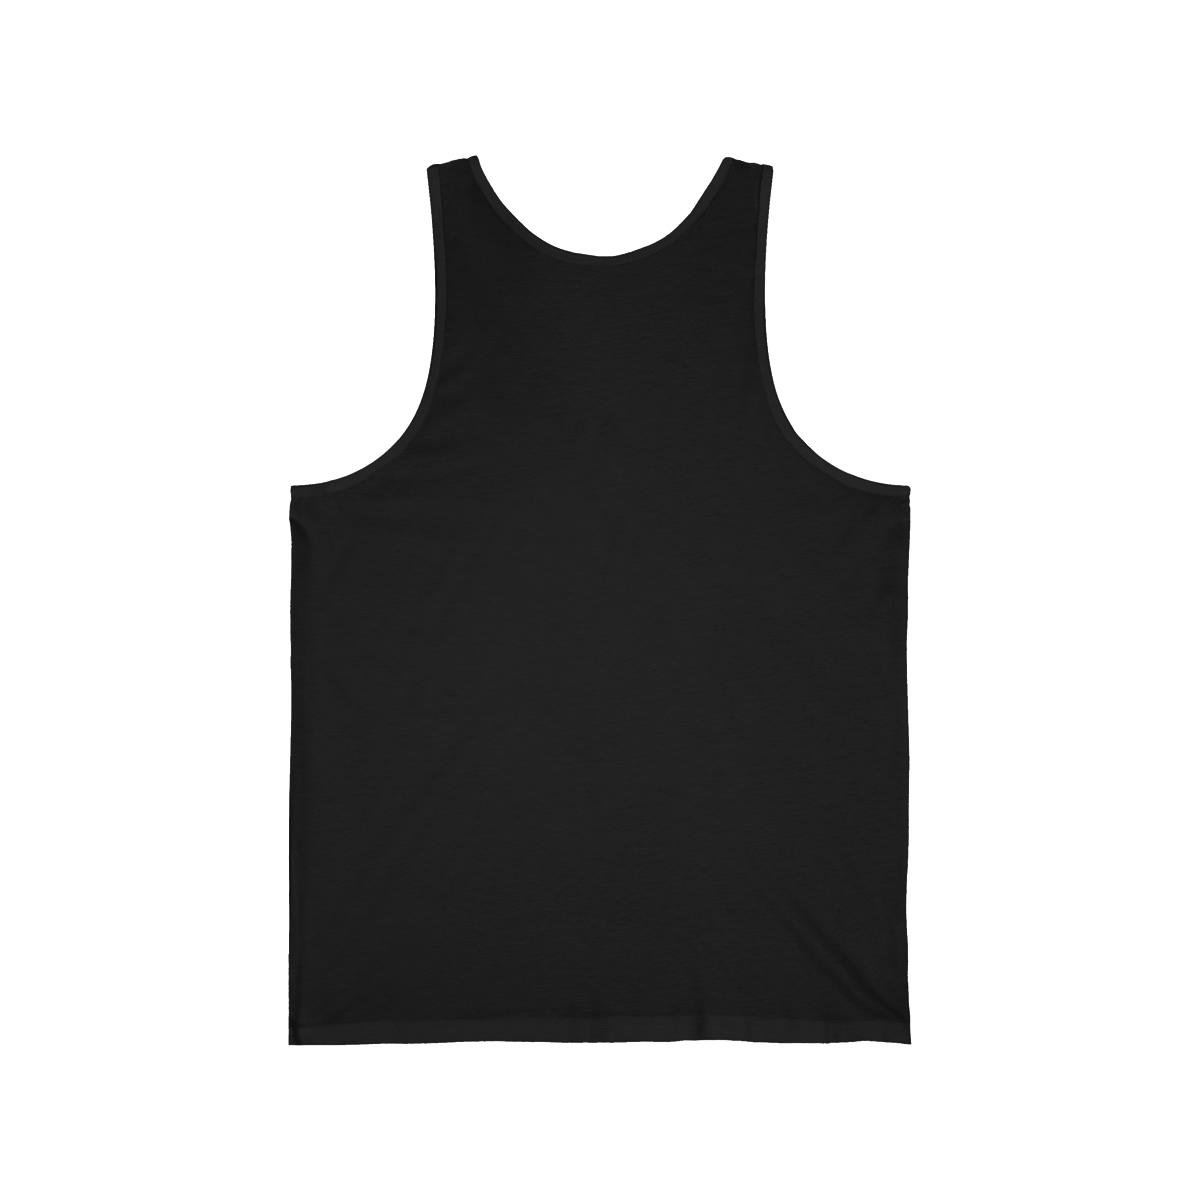 I Die Daily Outlined Logo Unisex Jersey Tank Top